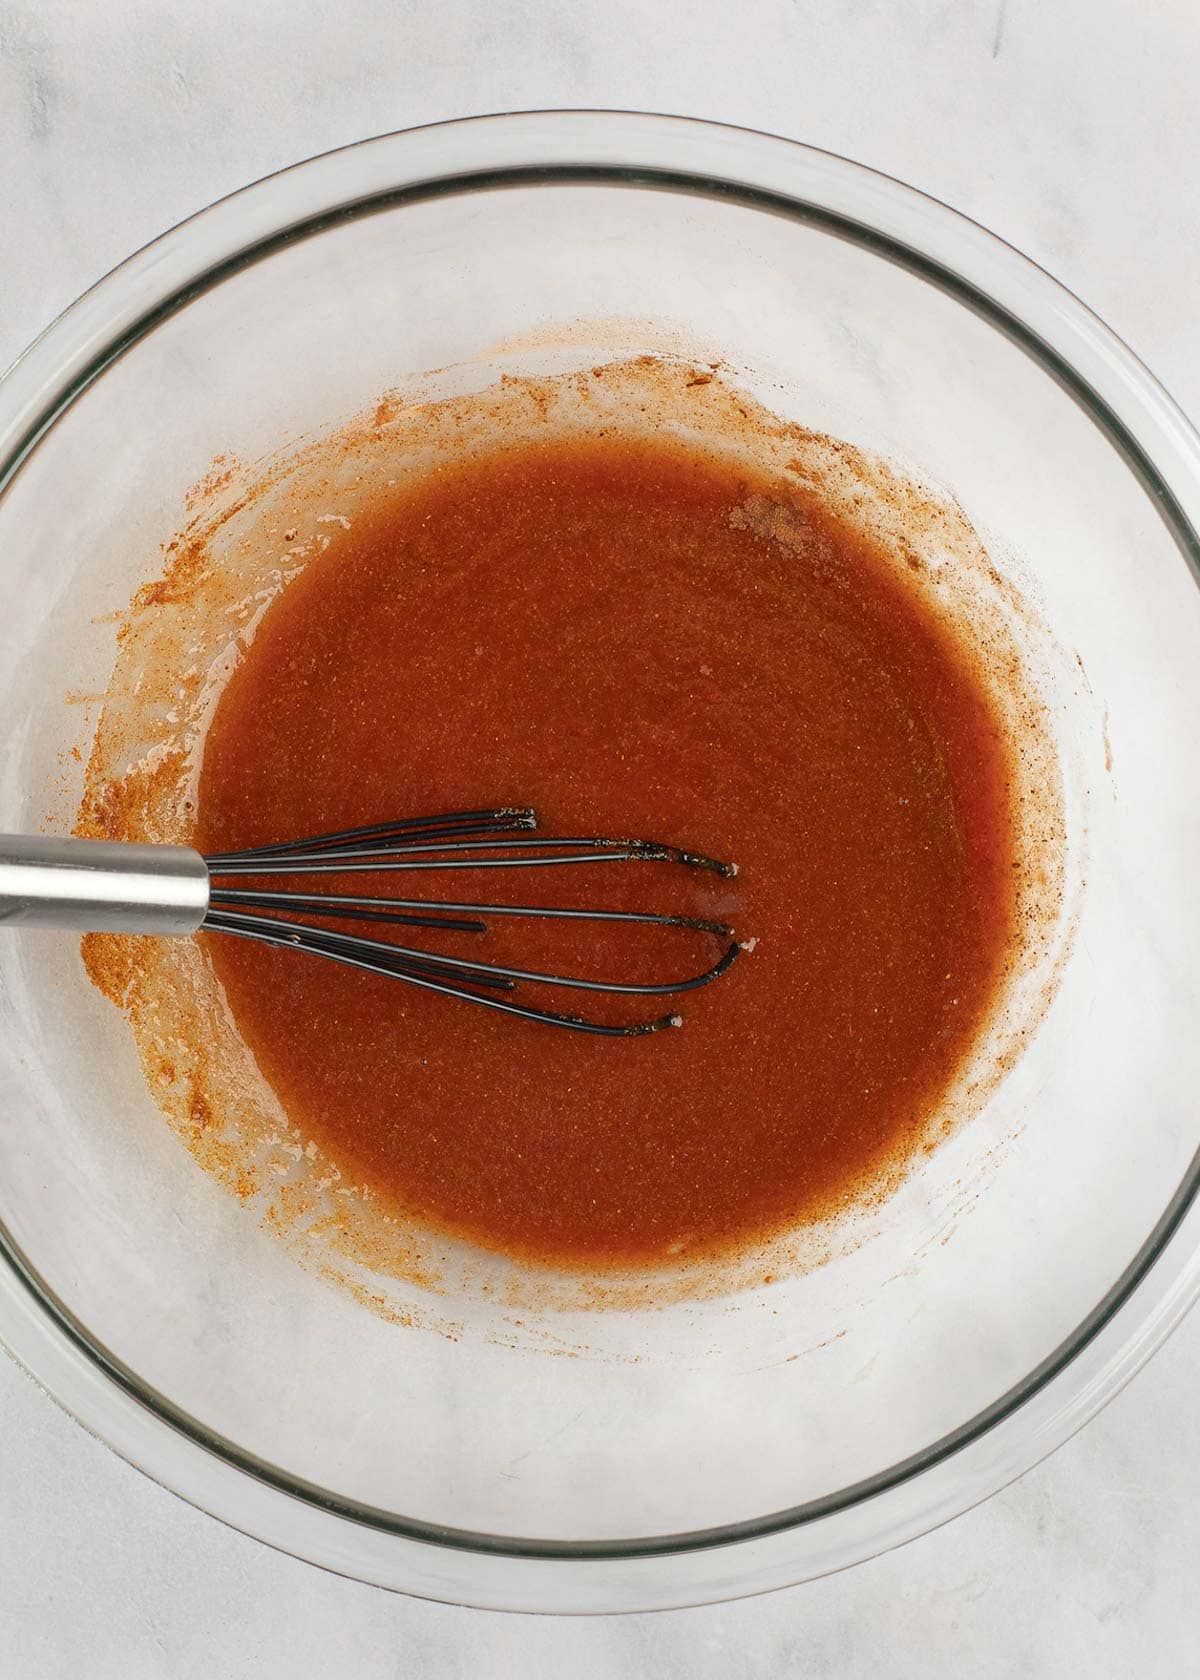 seasonings and marinade ingredients whisked together in a bowl